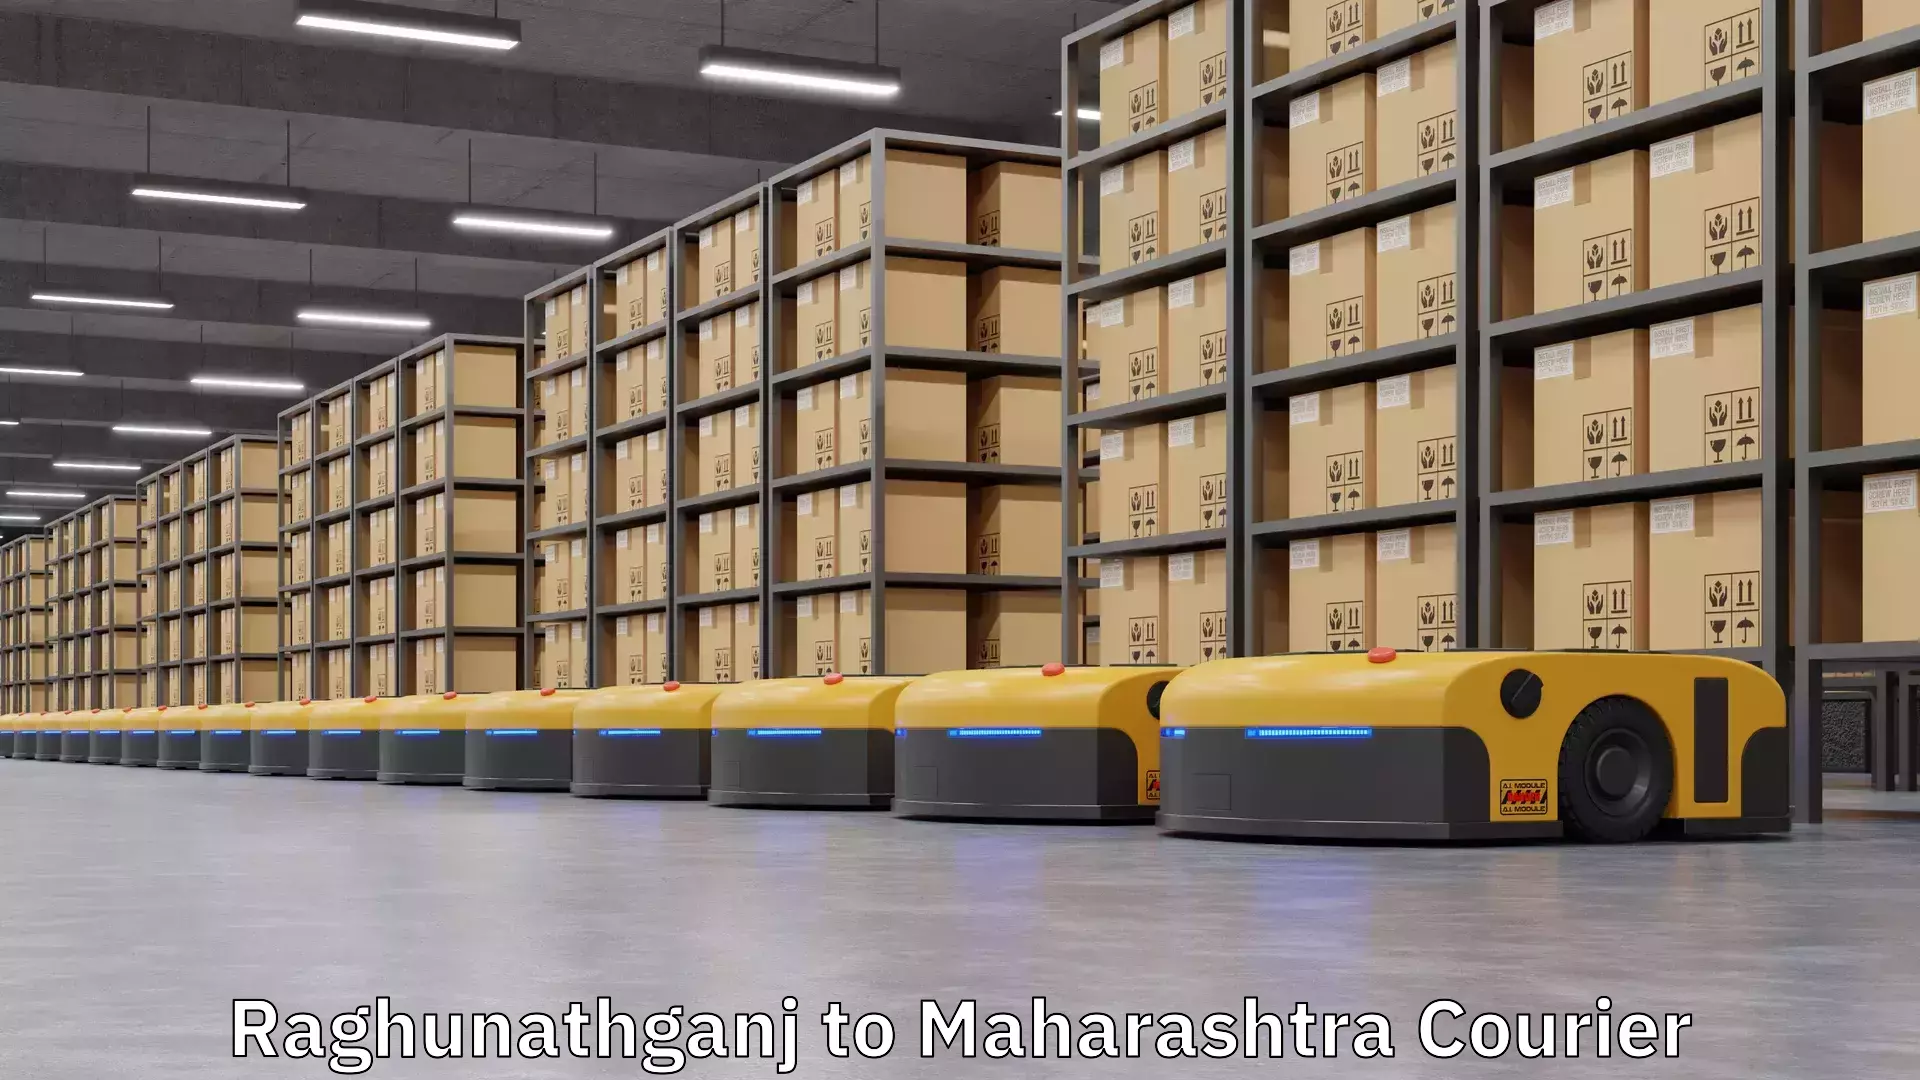 Personal courier services in Raghunathganj to Maharashtra